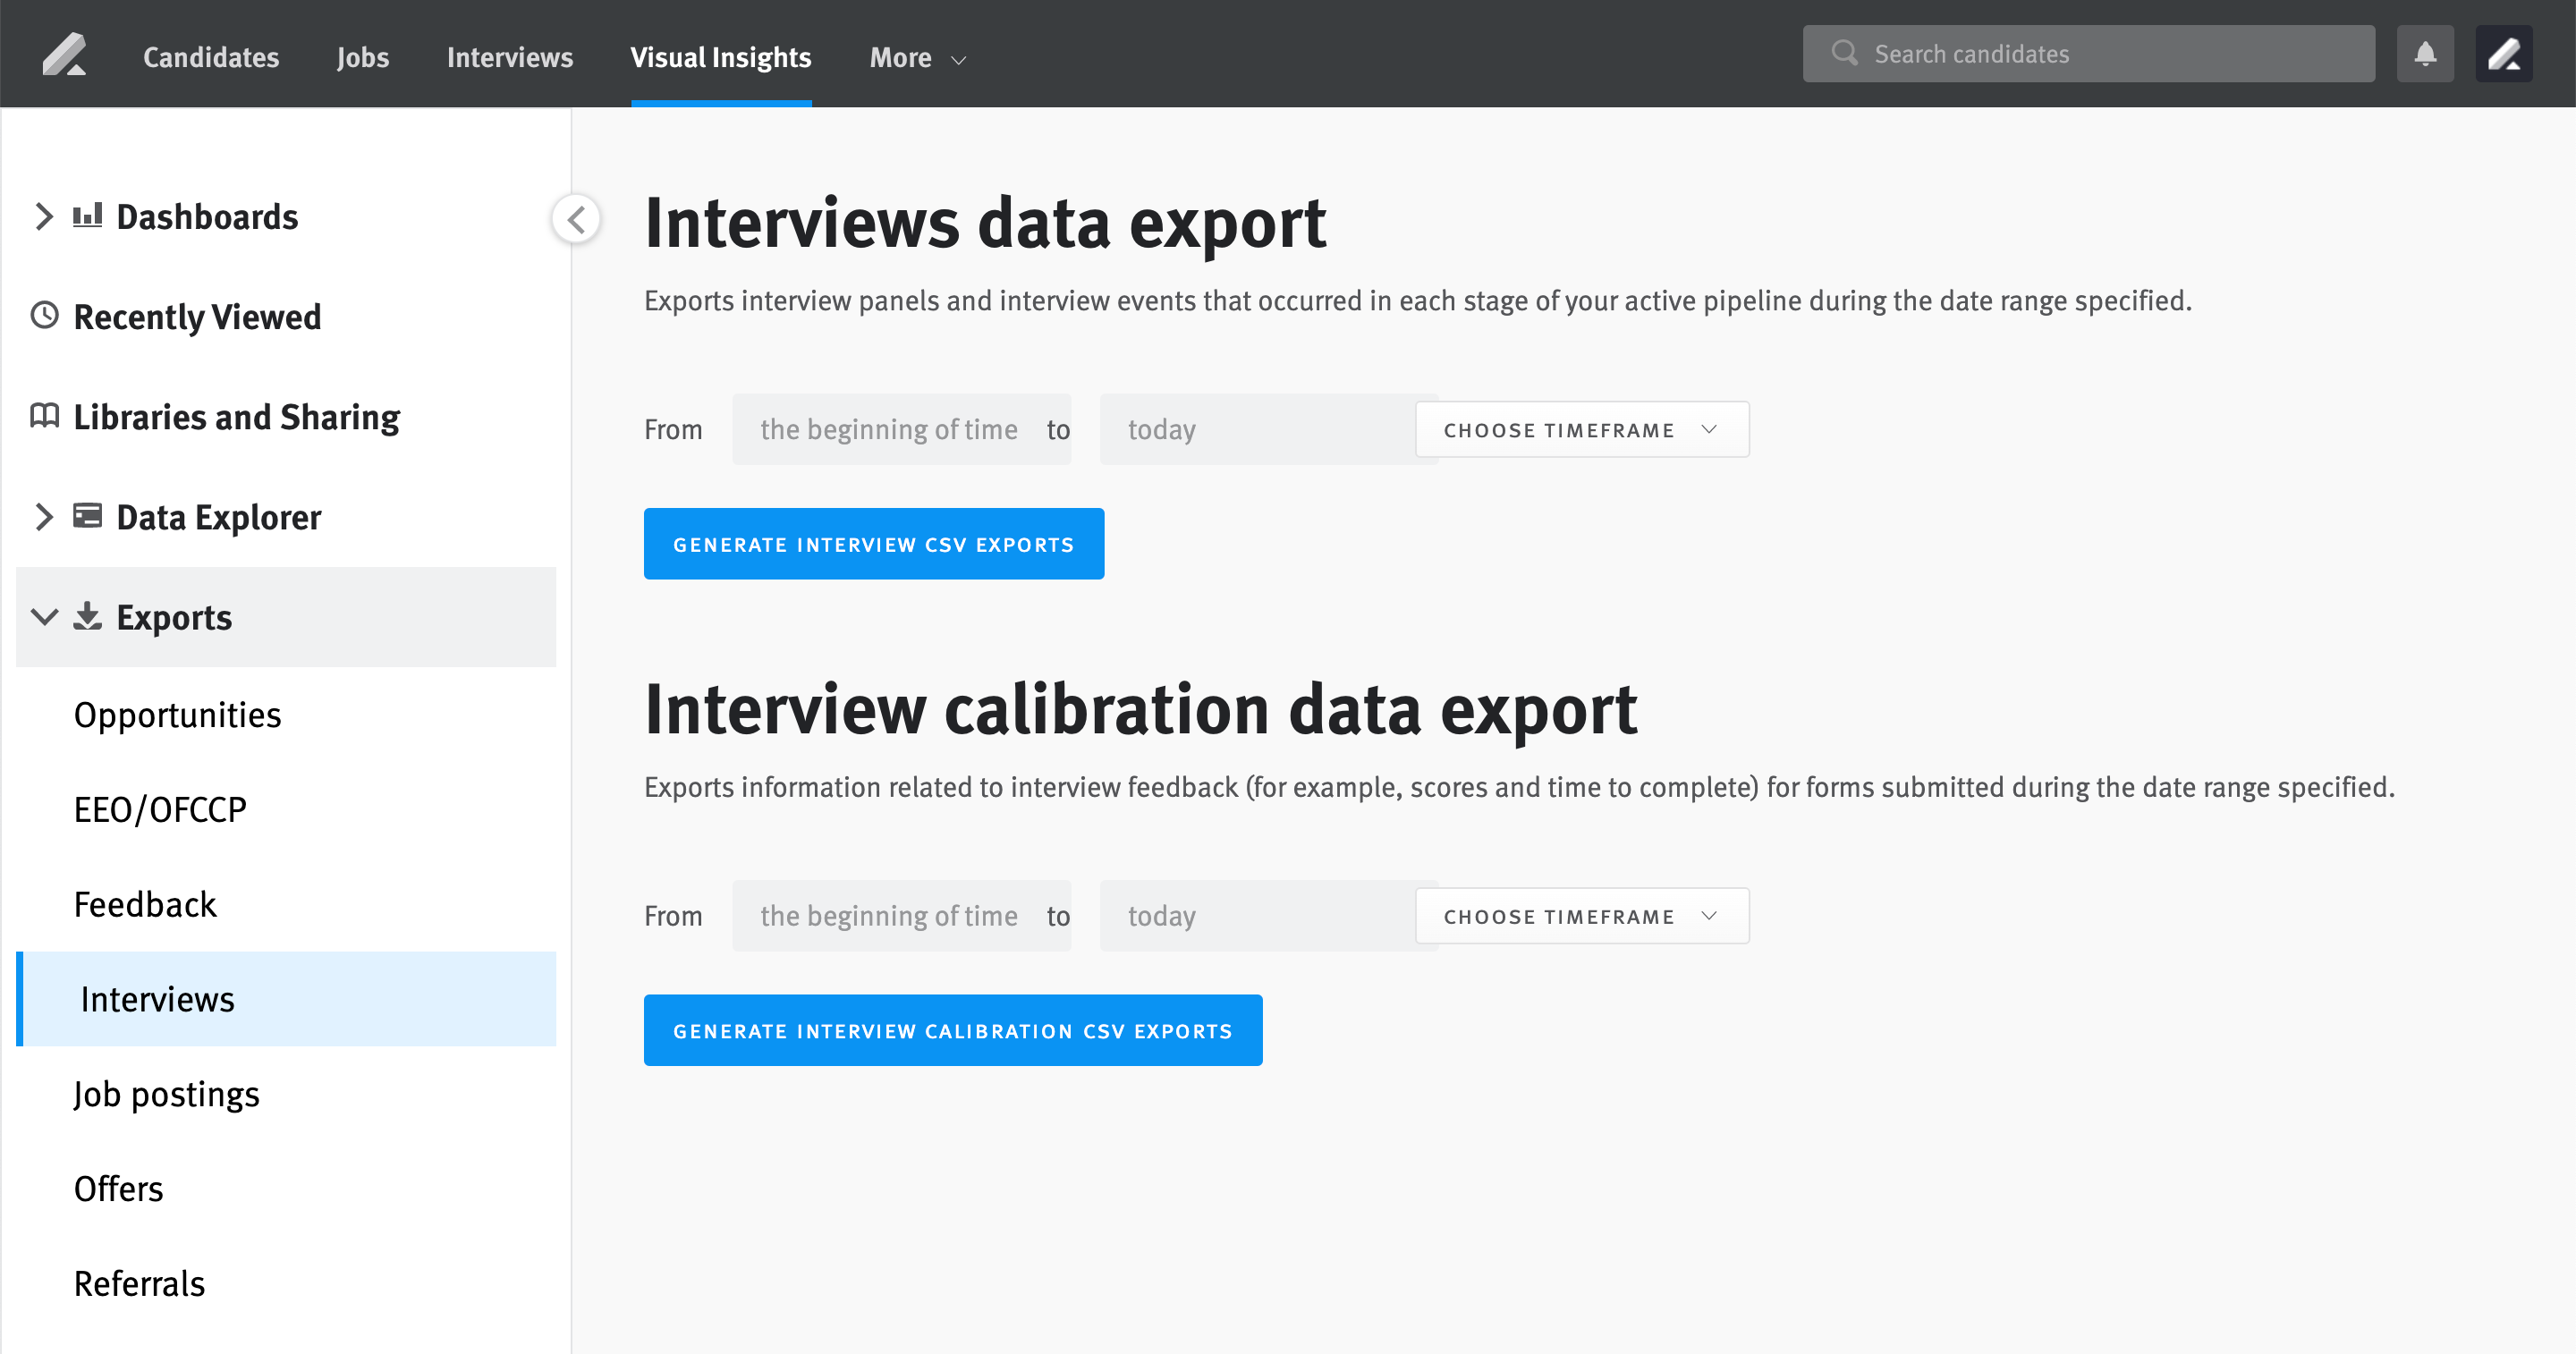 Exports page in Visual Insights with navigation menu expanded and Exports option highlighted on hover.